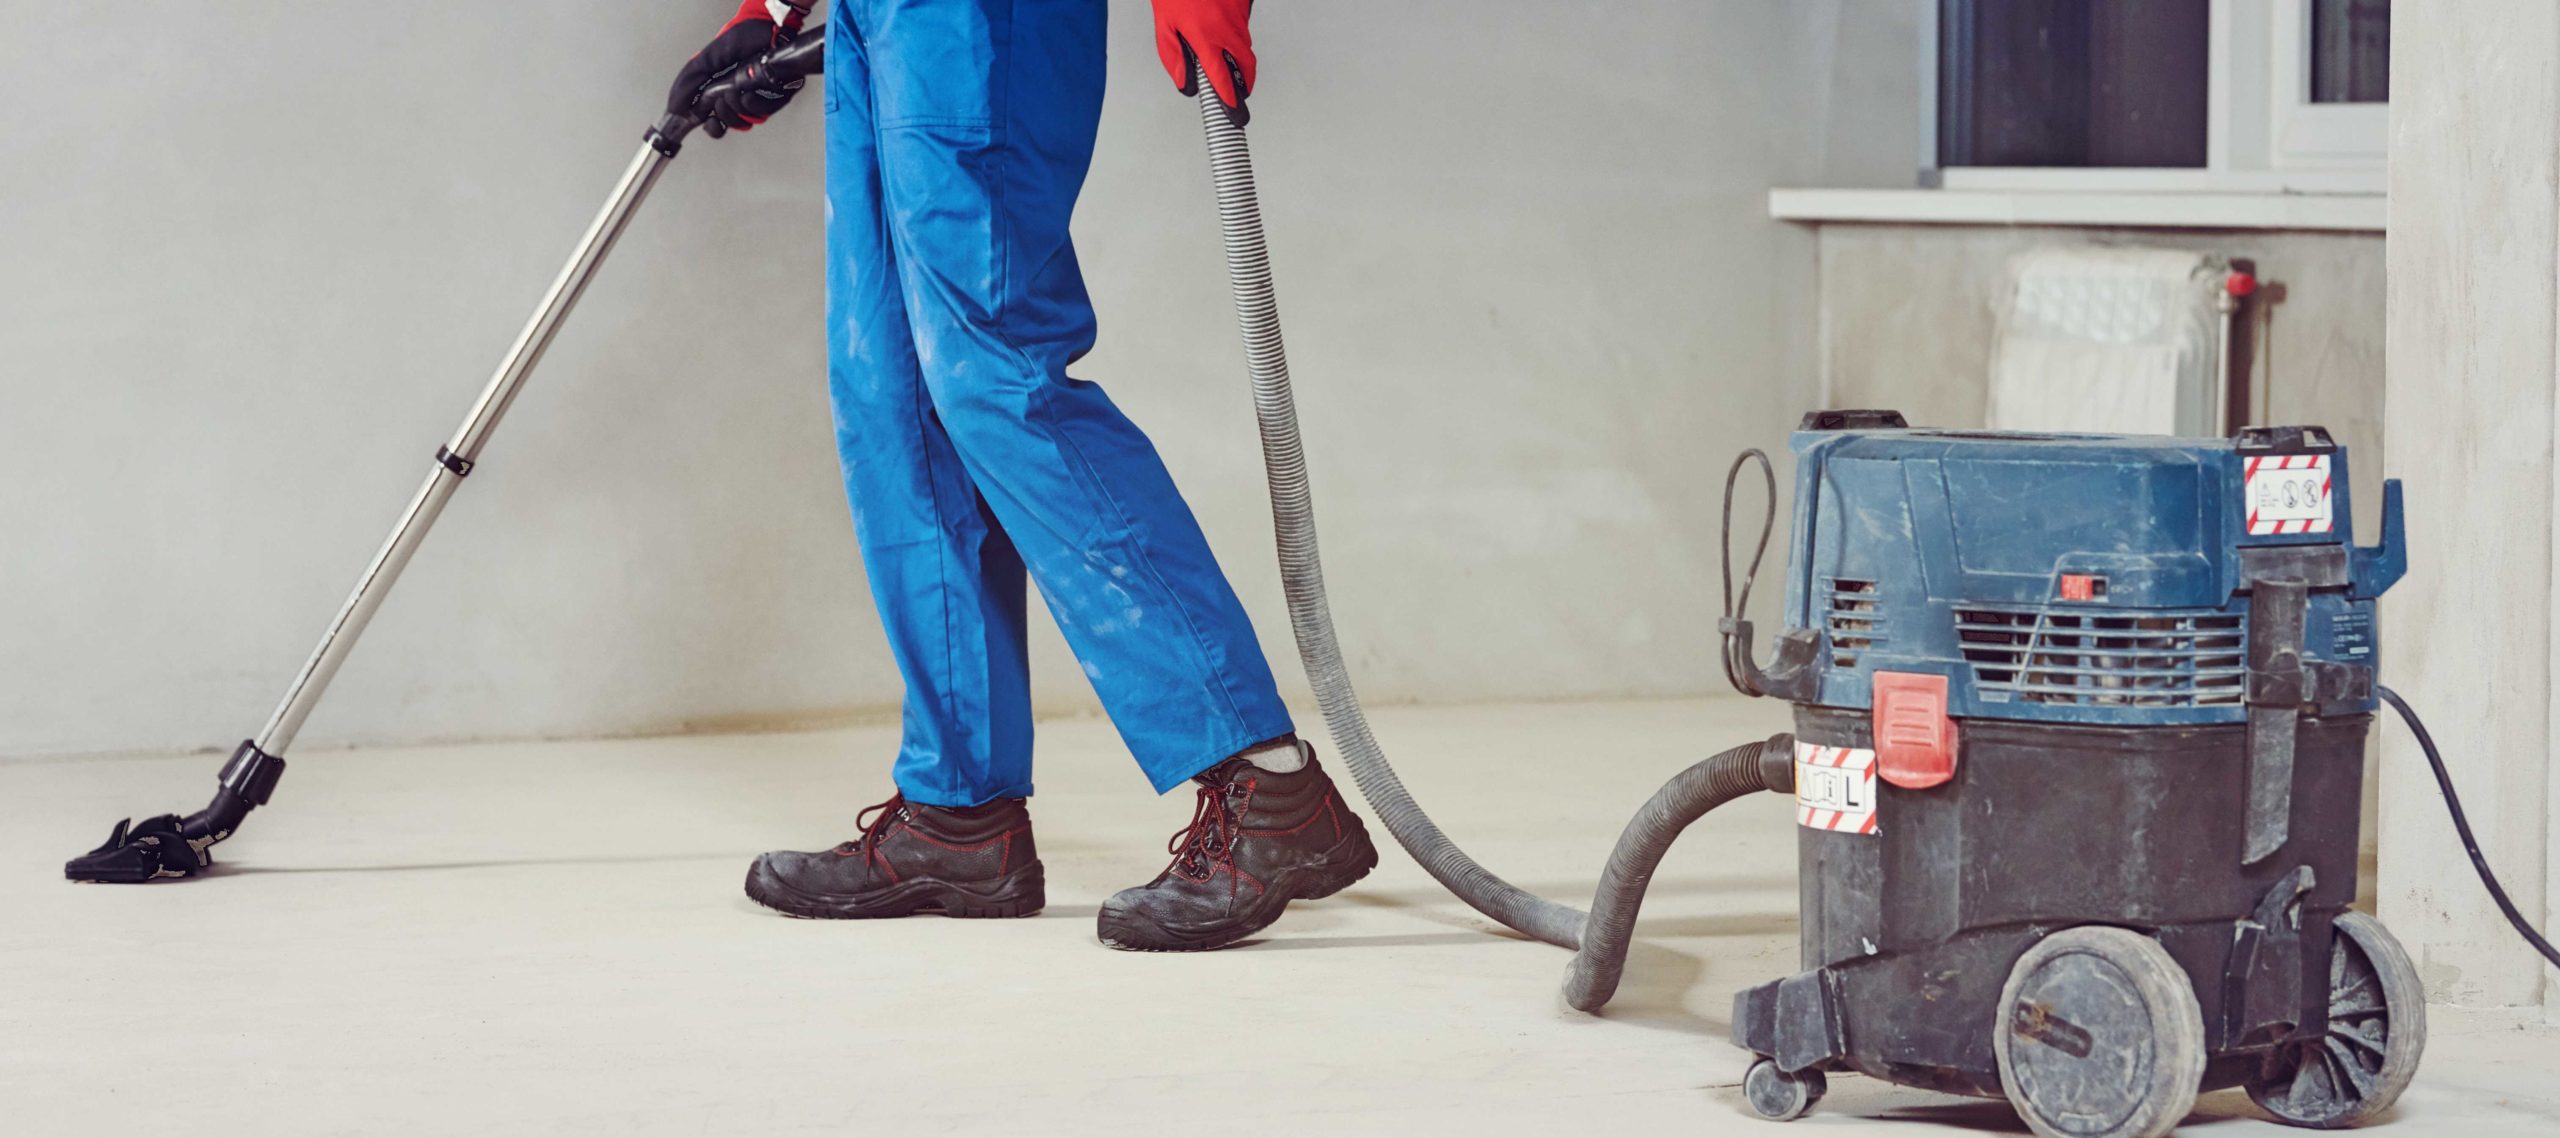 Post construction cleaning supplies & checklist of the equipment